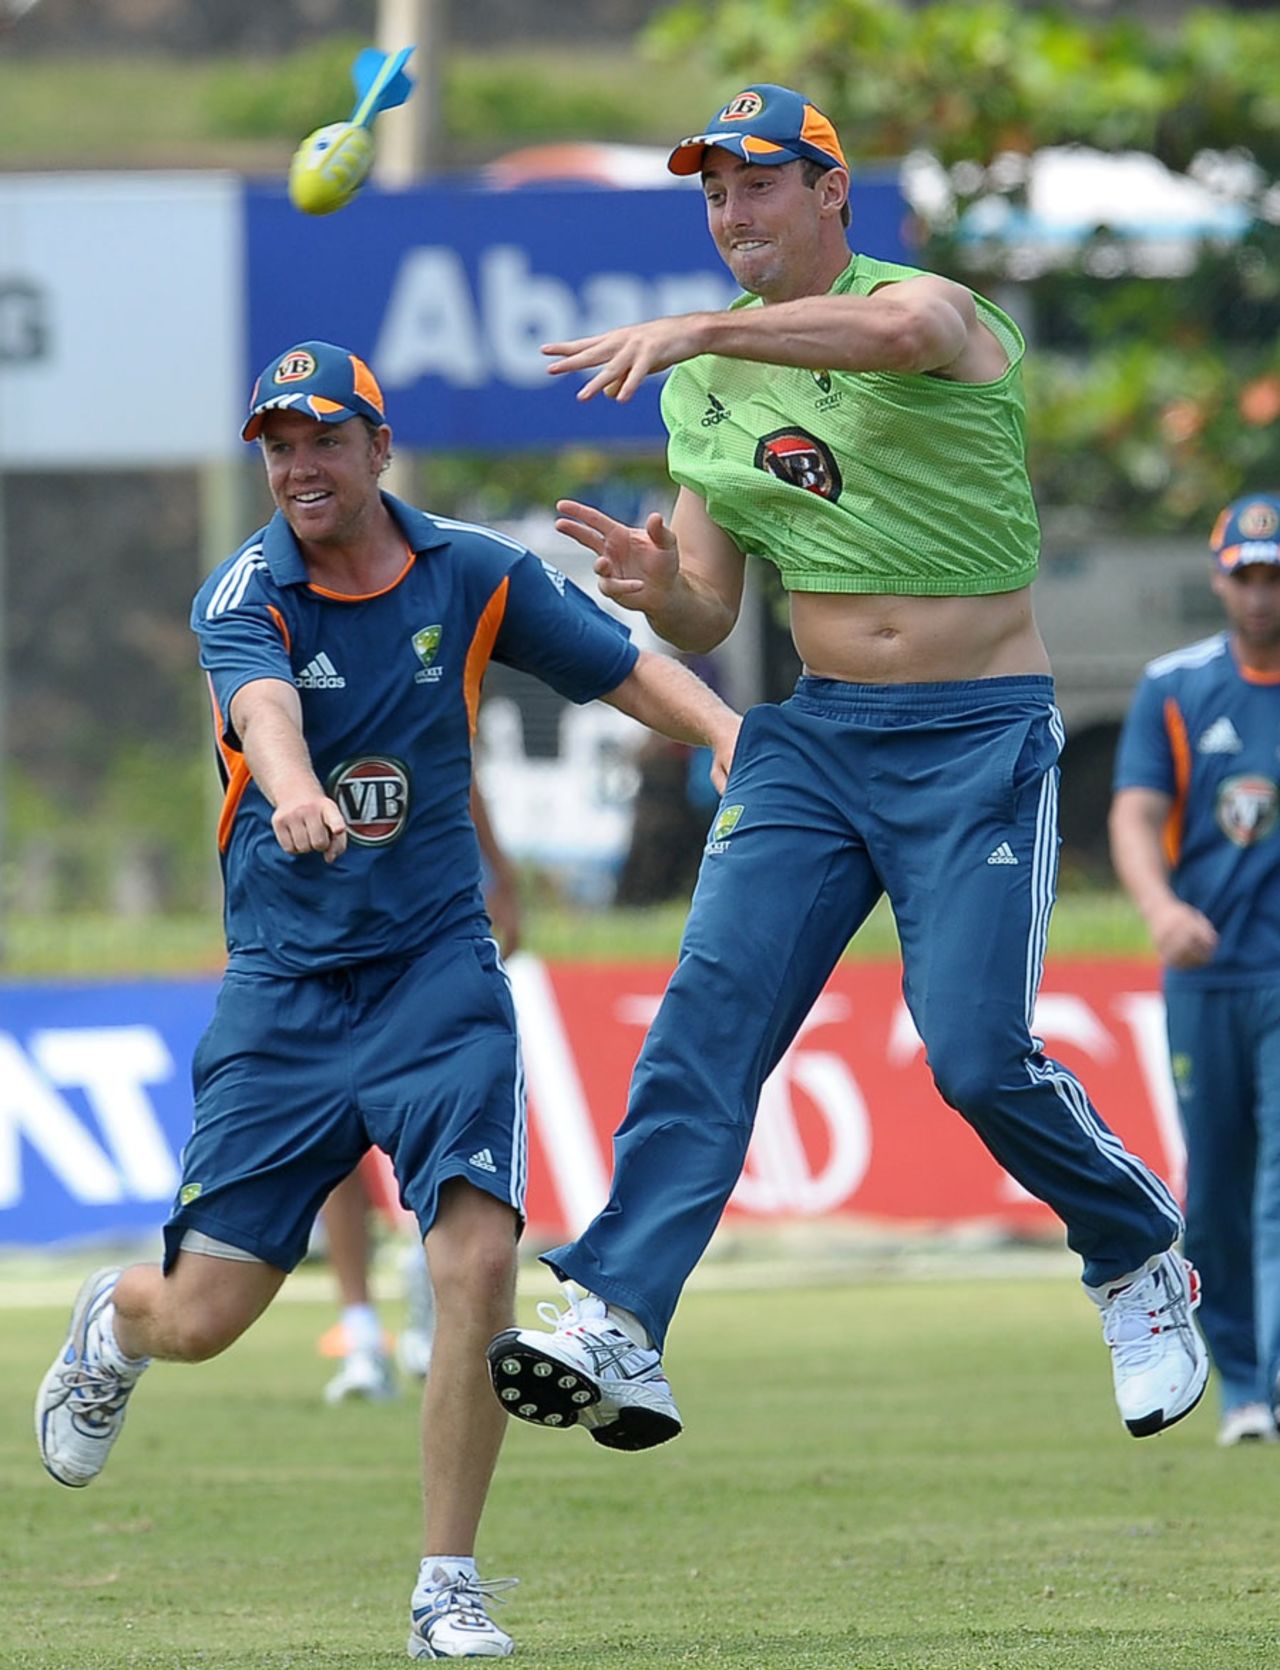 Shaun Marsh and Michael Beer warm up for the first Test, Galle, August 29, 2011